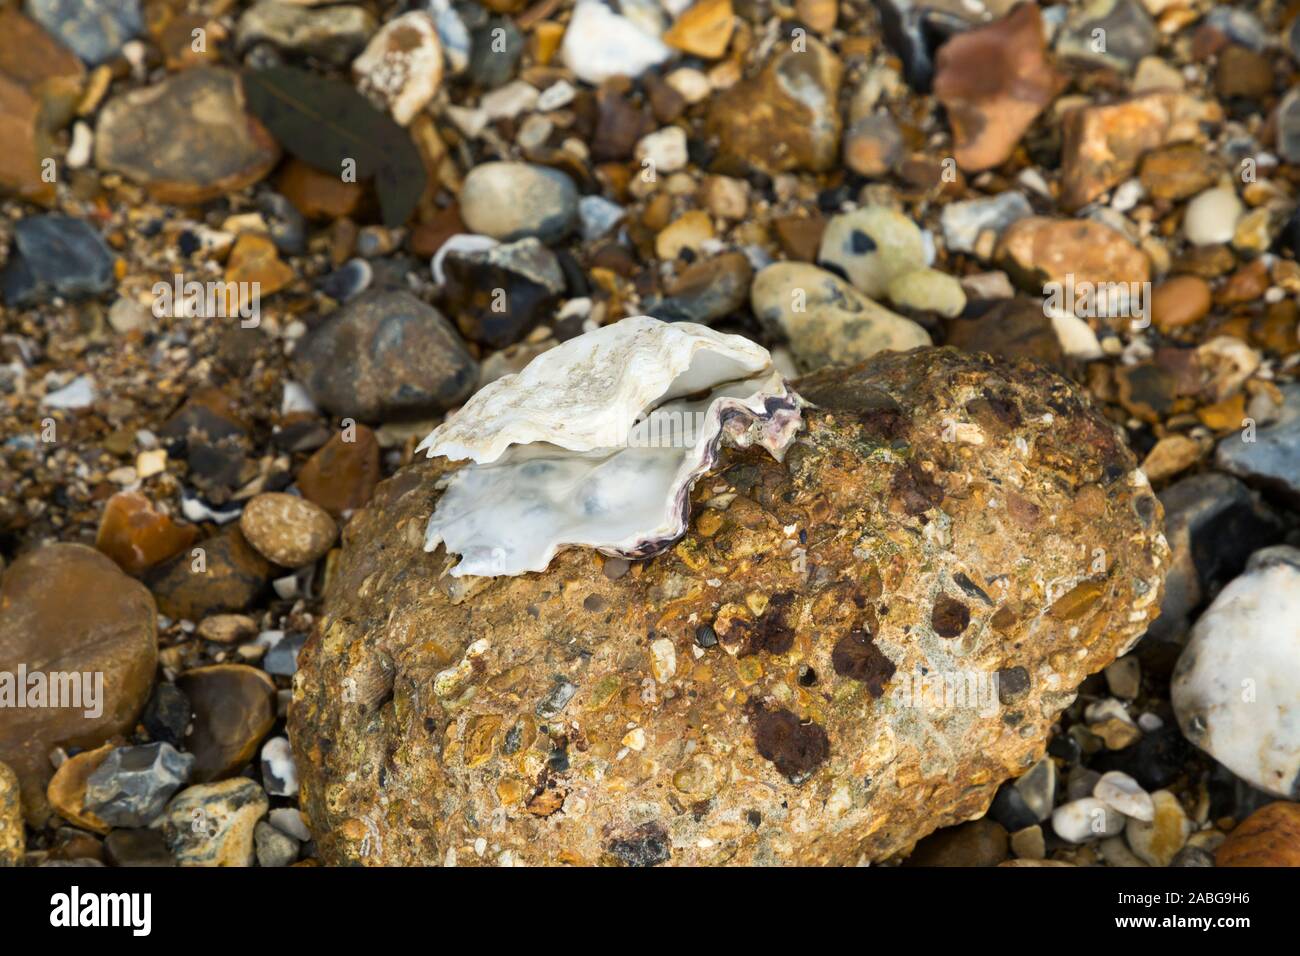 An open an empty shellfish shell which is attached to a piece of old eroded concrete at the seashore. The shell is perhaps an old oyster or a clam shell. UK (105) Stock Photo